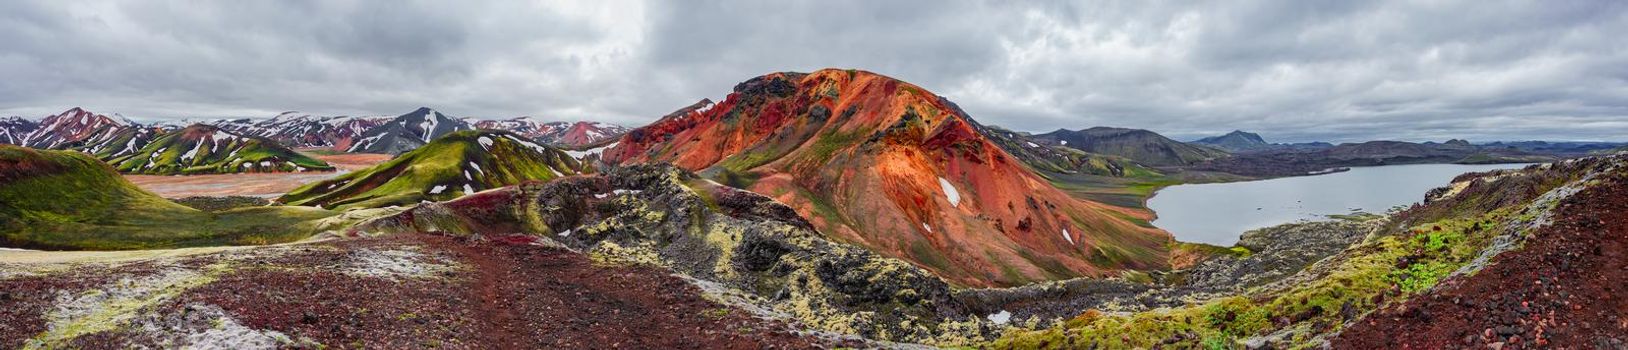 Panoramic surreal Icelandic landscape of colorful rainbow volcanic Landmannalaugar mountains, volcanic craters at famous Laugavegur hiking trail with dramatic sky, and Frostastadavatn lake in Iceland